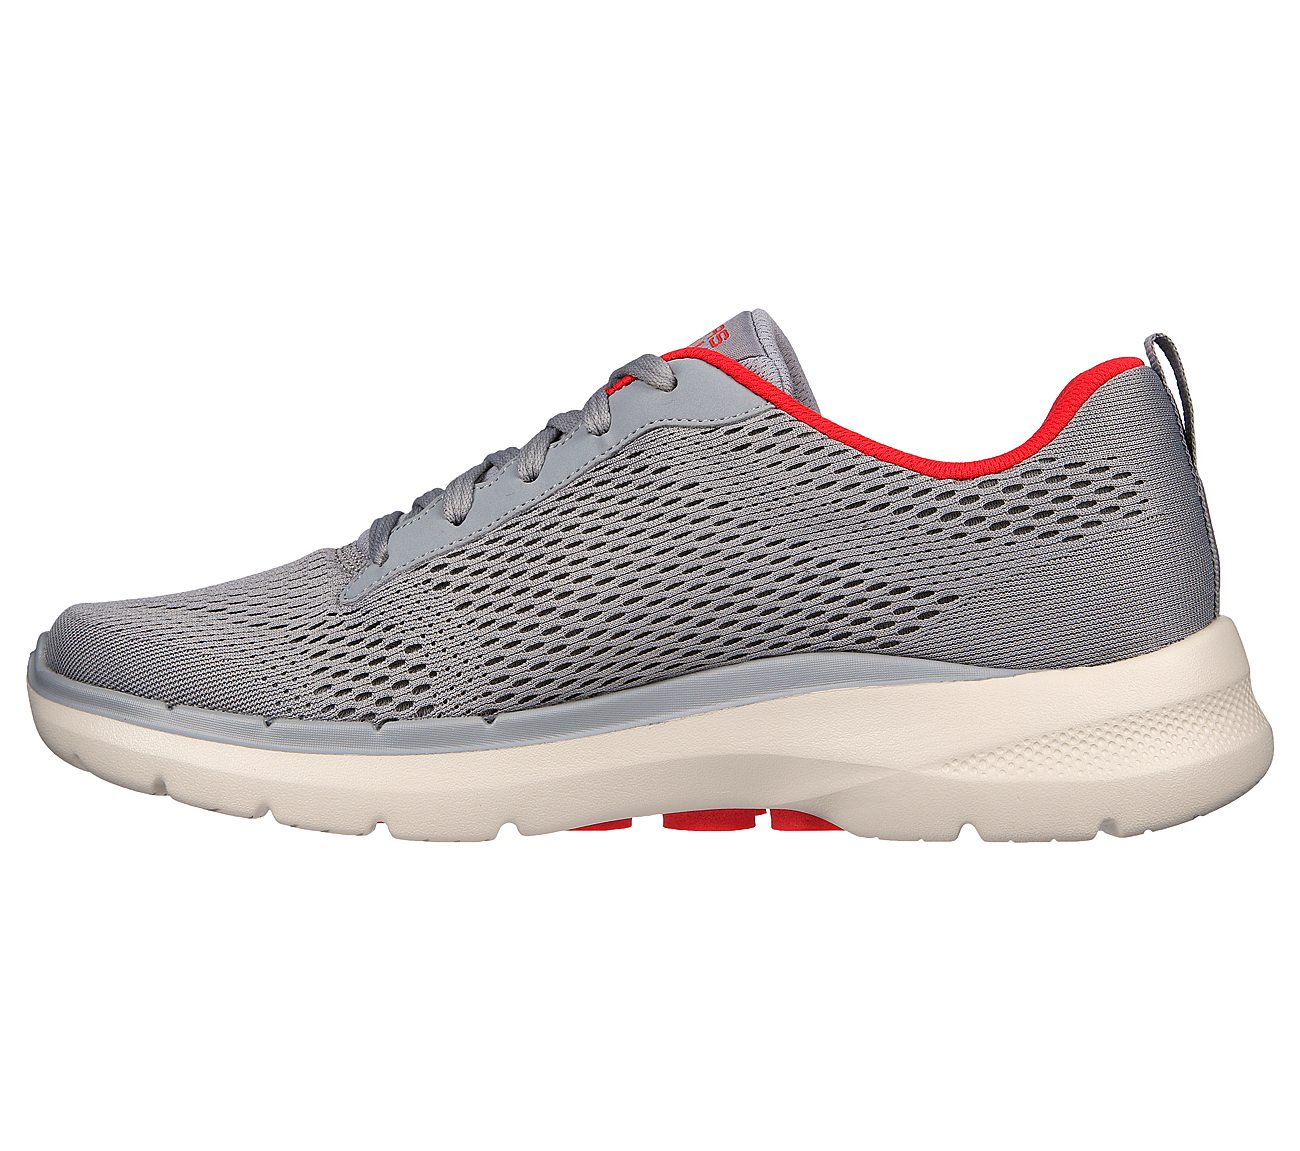 Skechers Grey/Red Go Walk 6 Avalo 2 Mens Lace Up Shoes - Style ID ...